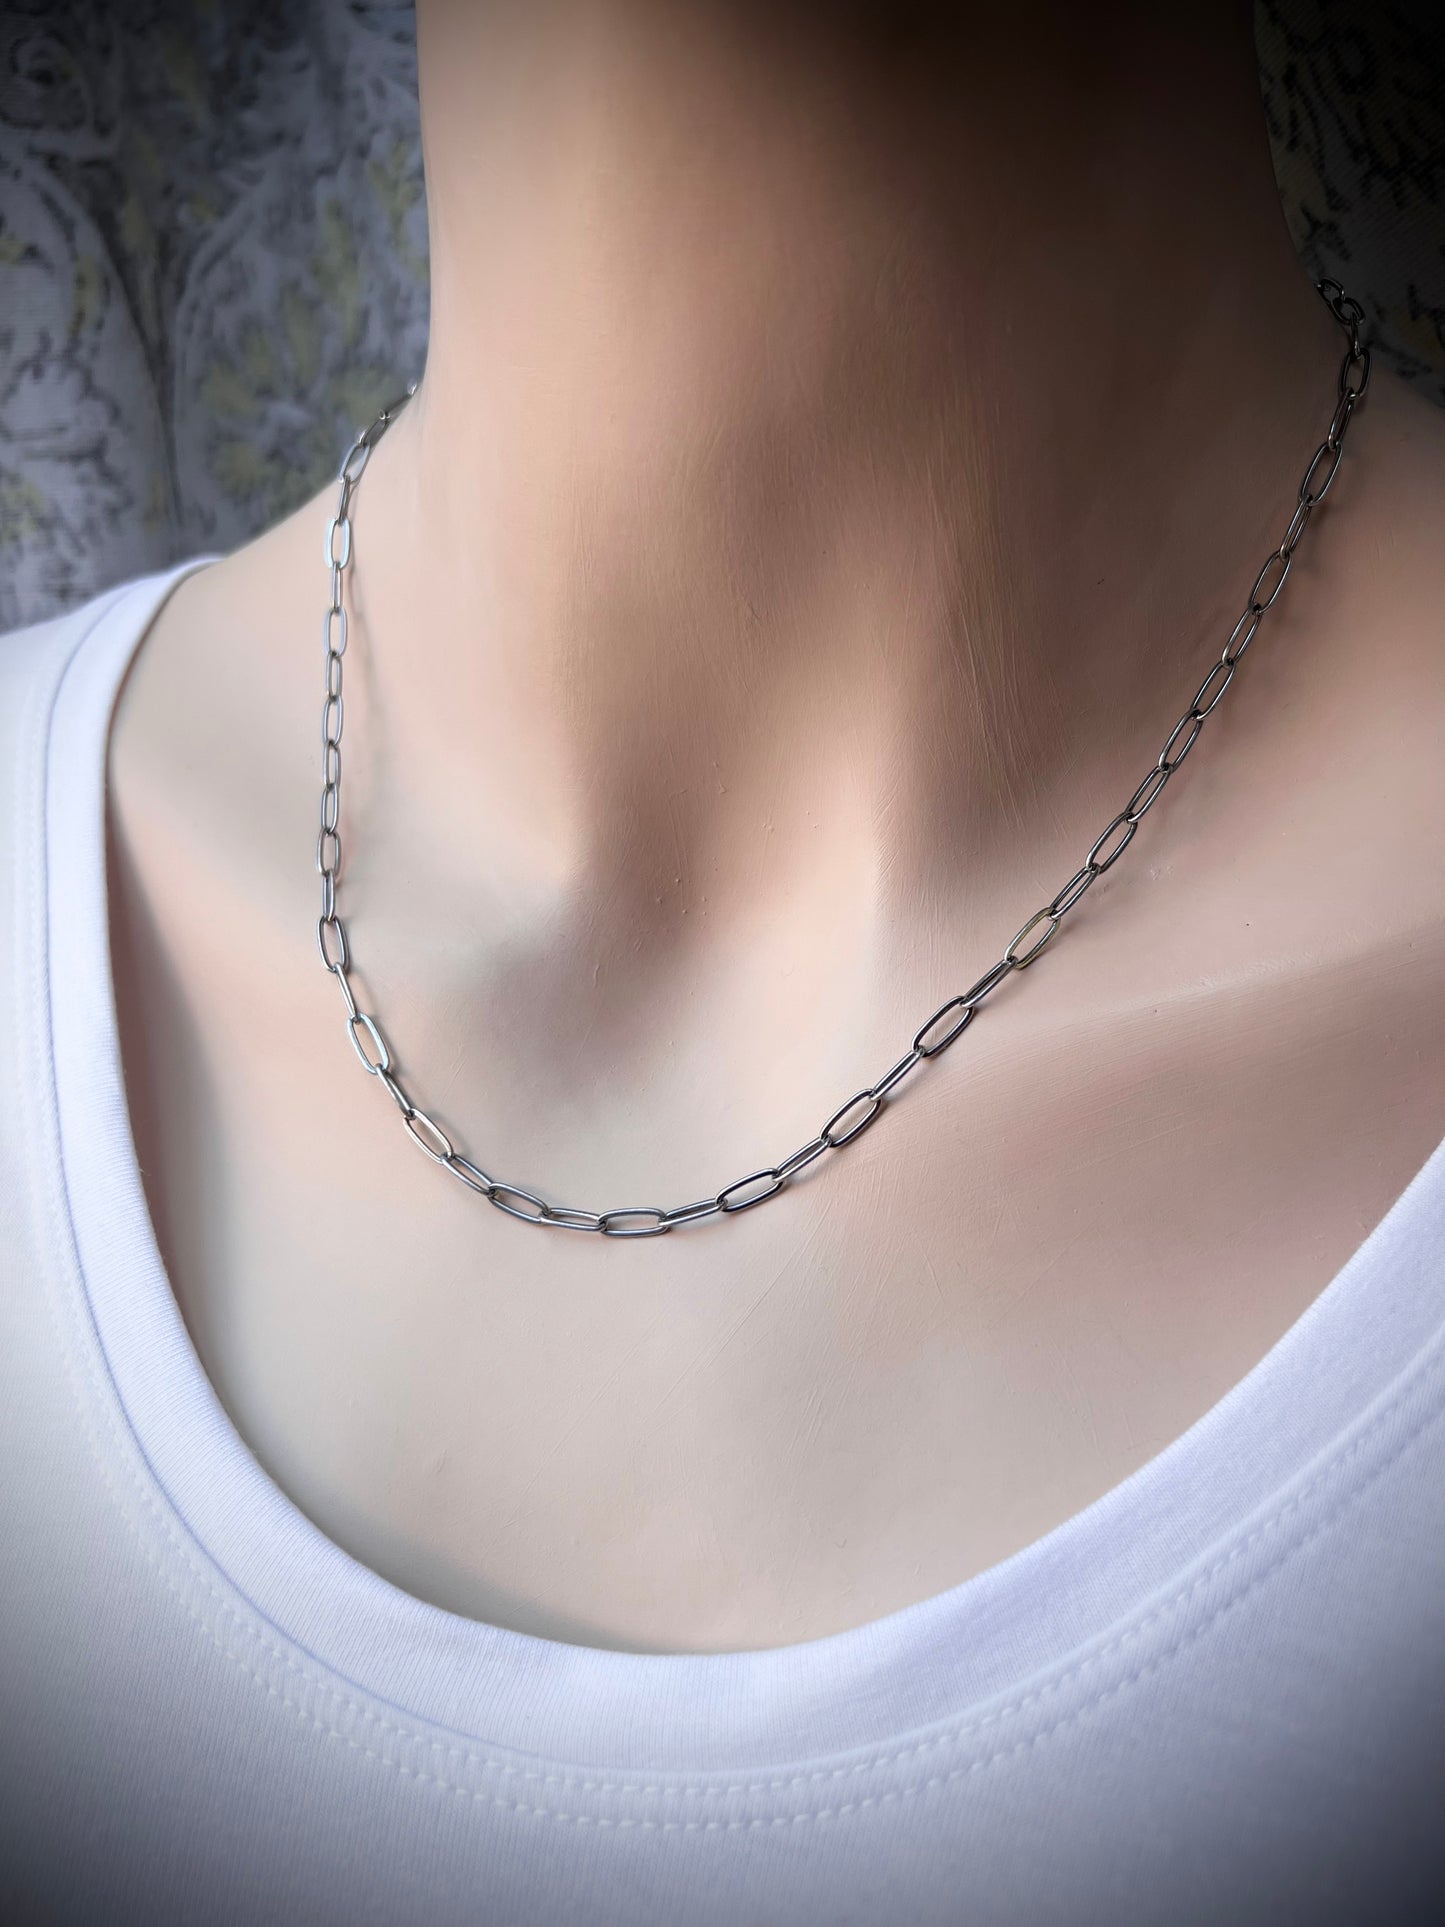 Sterling Silver Rectangular Chain - Adjustable Chain with Handmade Hook Clasp and Extender